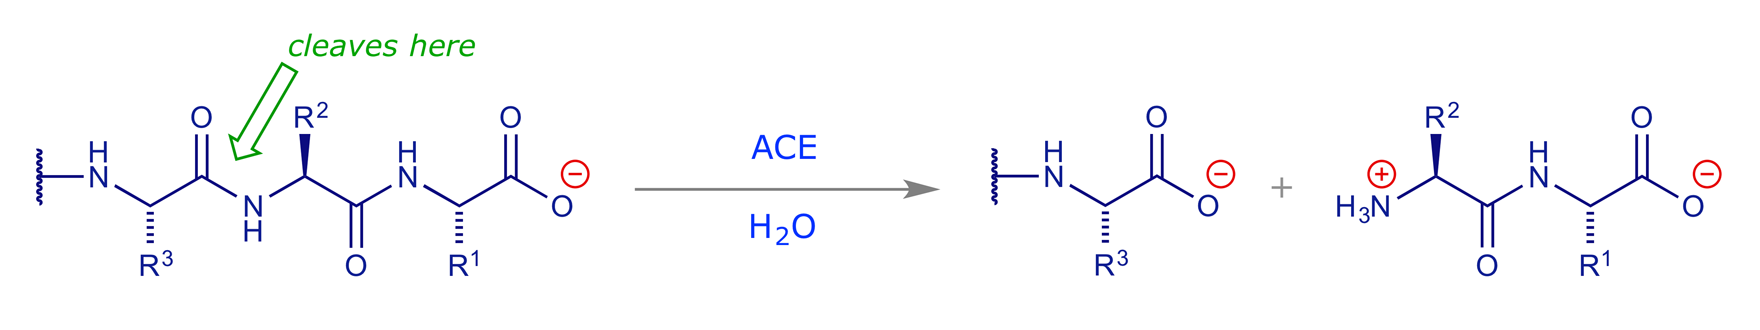 Reaction scheme showing where ACE cleaves angiotensin I